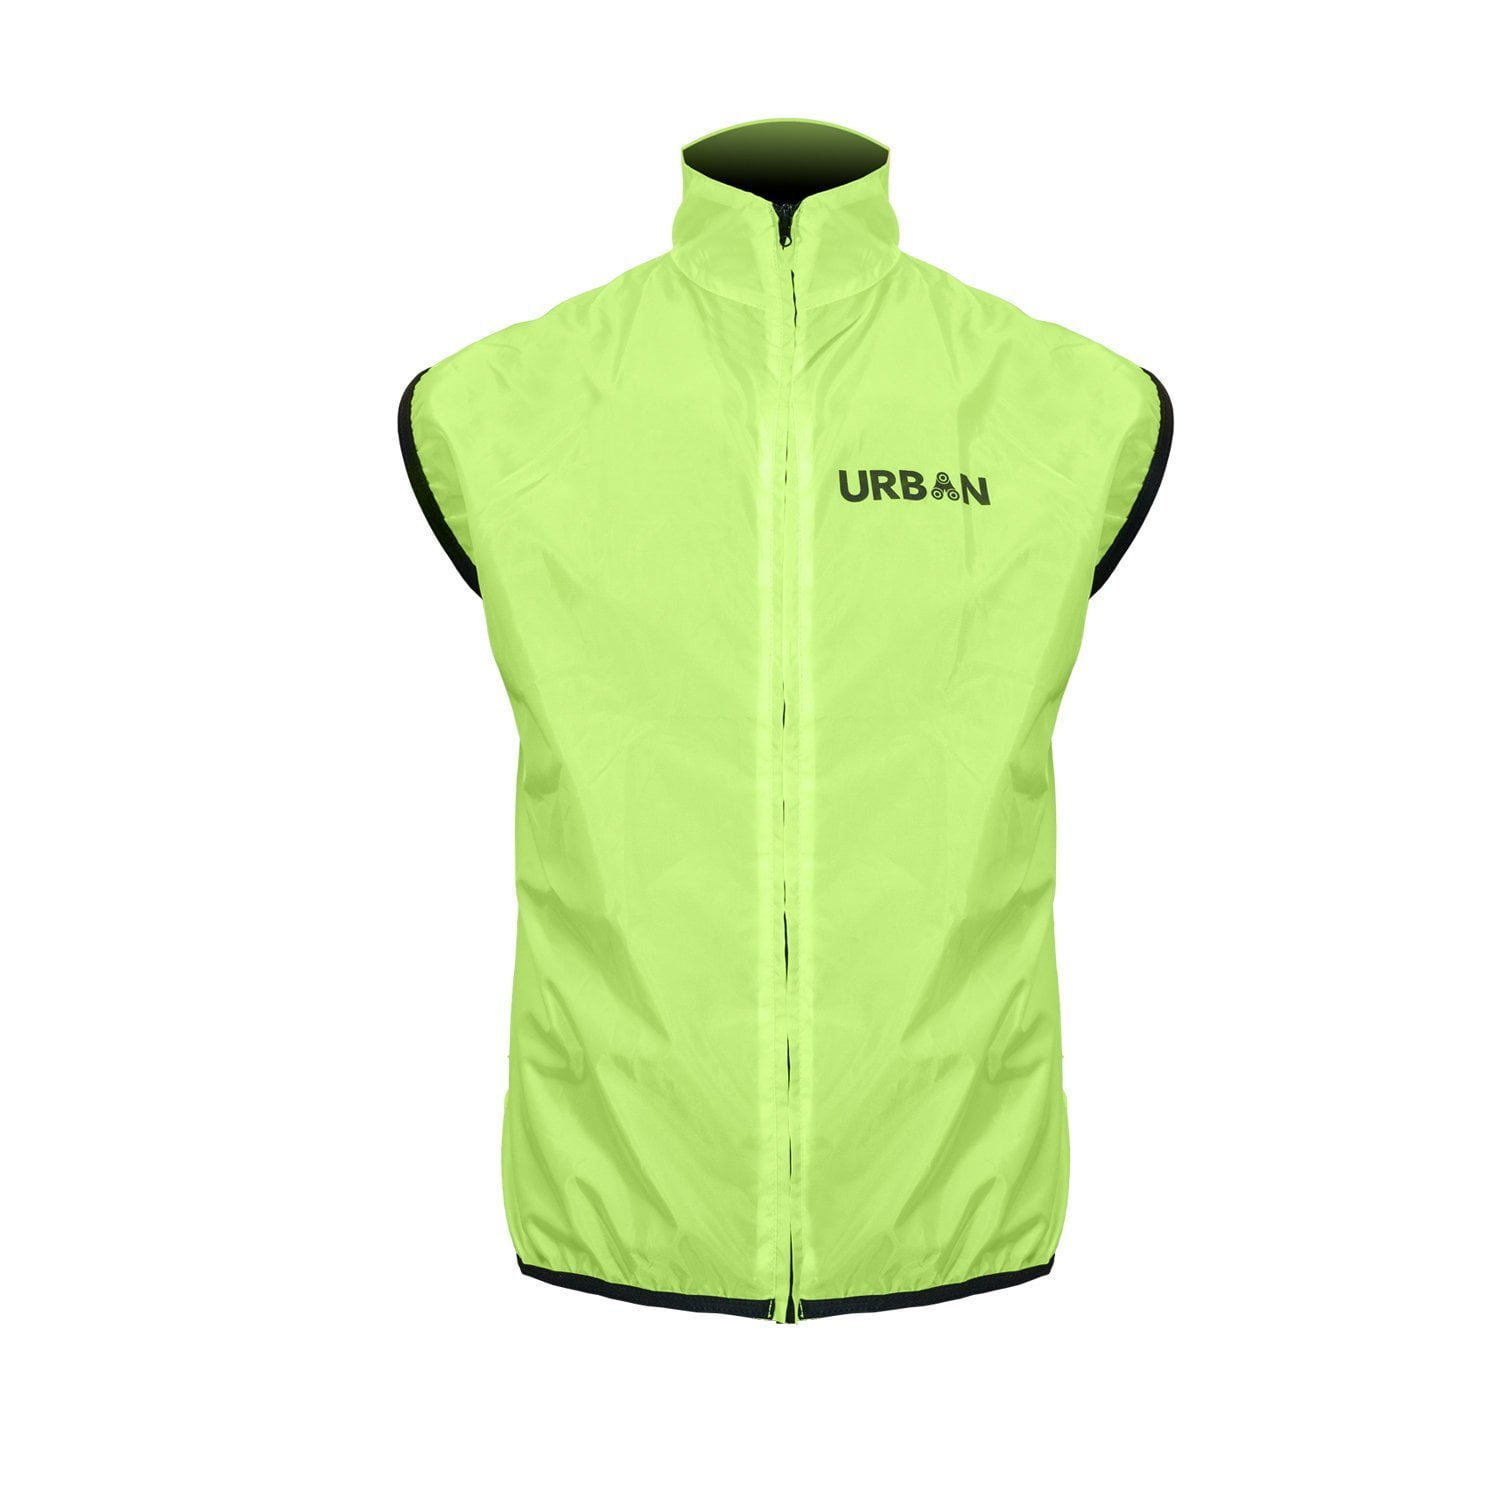 High Visibility Reflective Cycling Vest Bicycle Jackets Z4T5 Y0E0 Bike N3W9